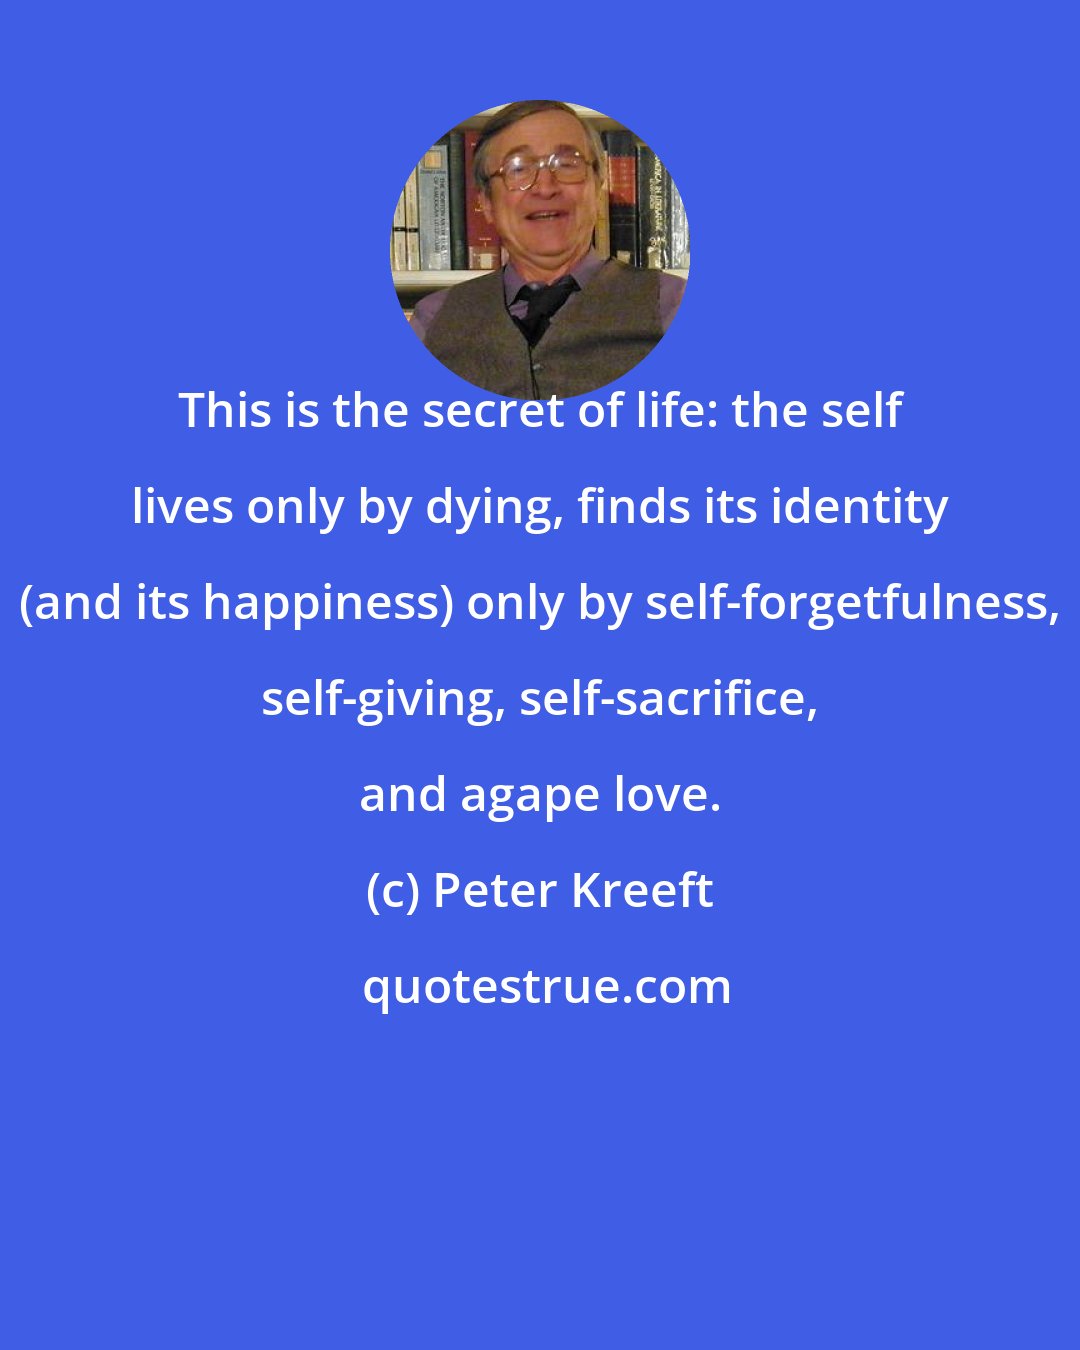 Peter Kreeft: This is the secret of life: the self lives only by dying, finds its identity (and its happiness) only by self-forgetfulness, self-giving, self-sacrifice, and agape love.